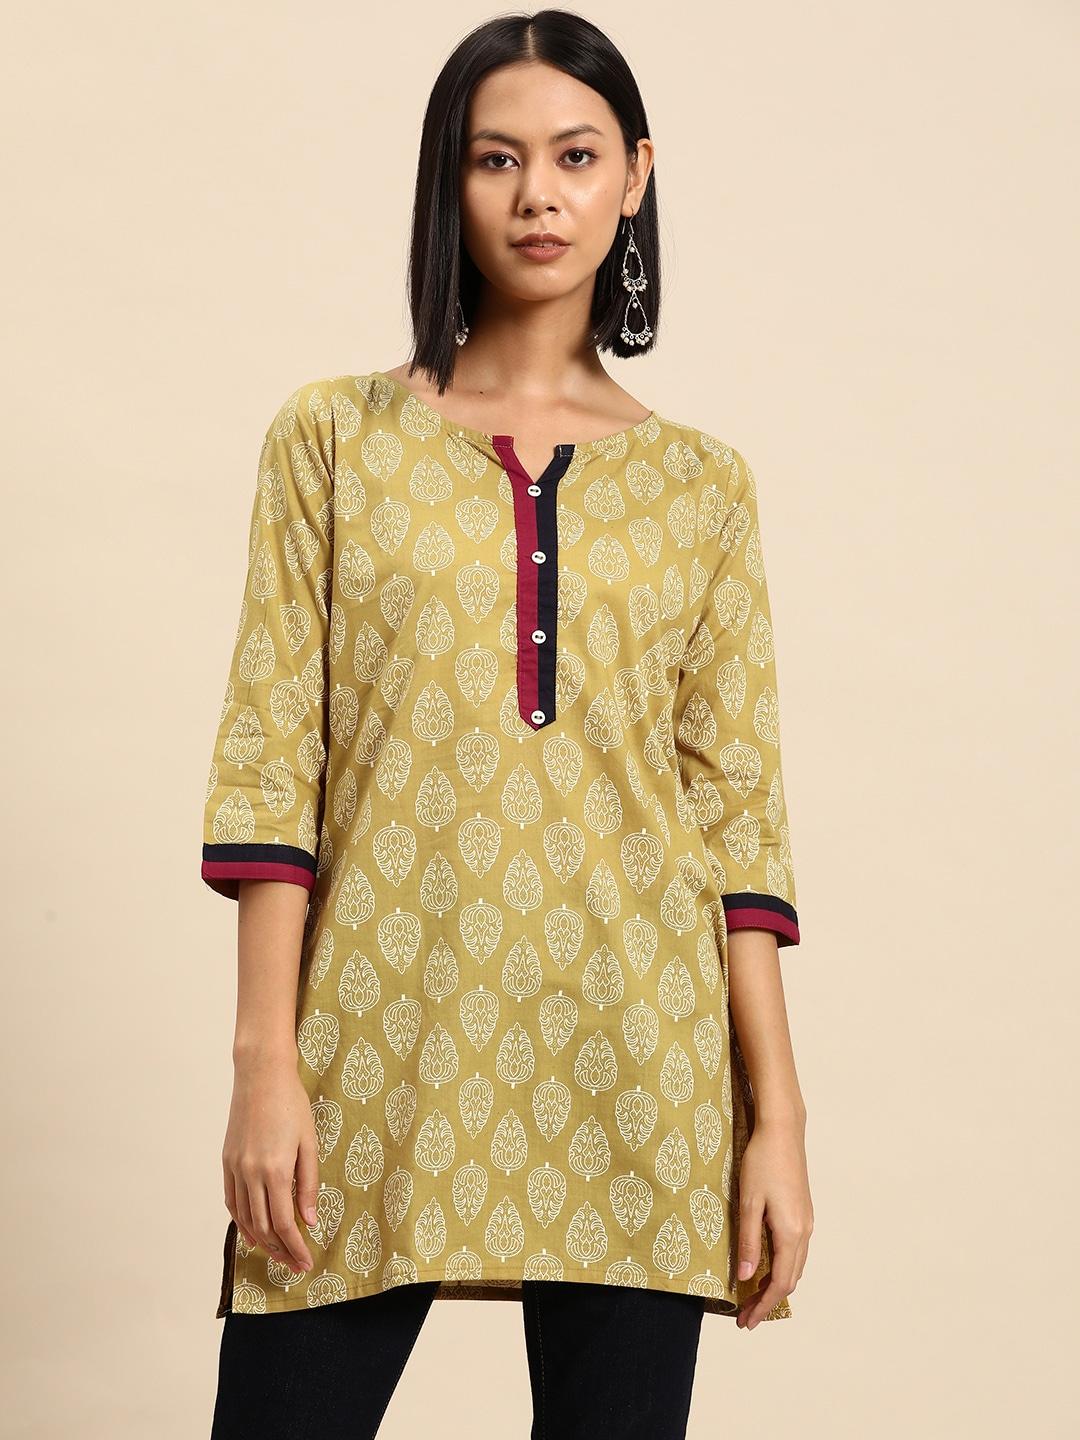 all-about-you-geometric-printed-pure-cotton-kurti